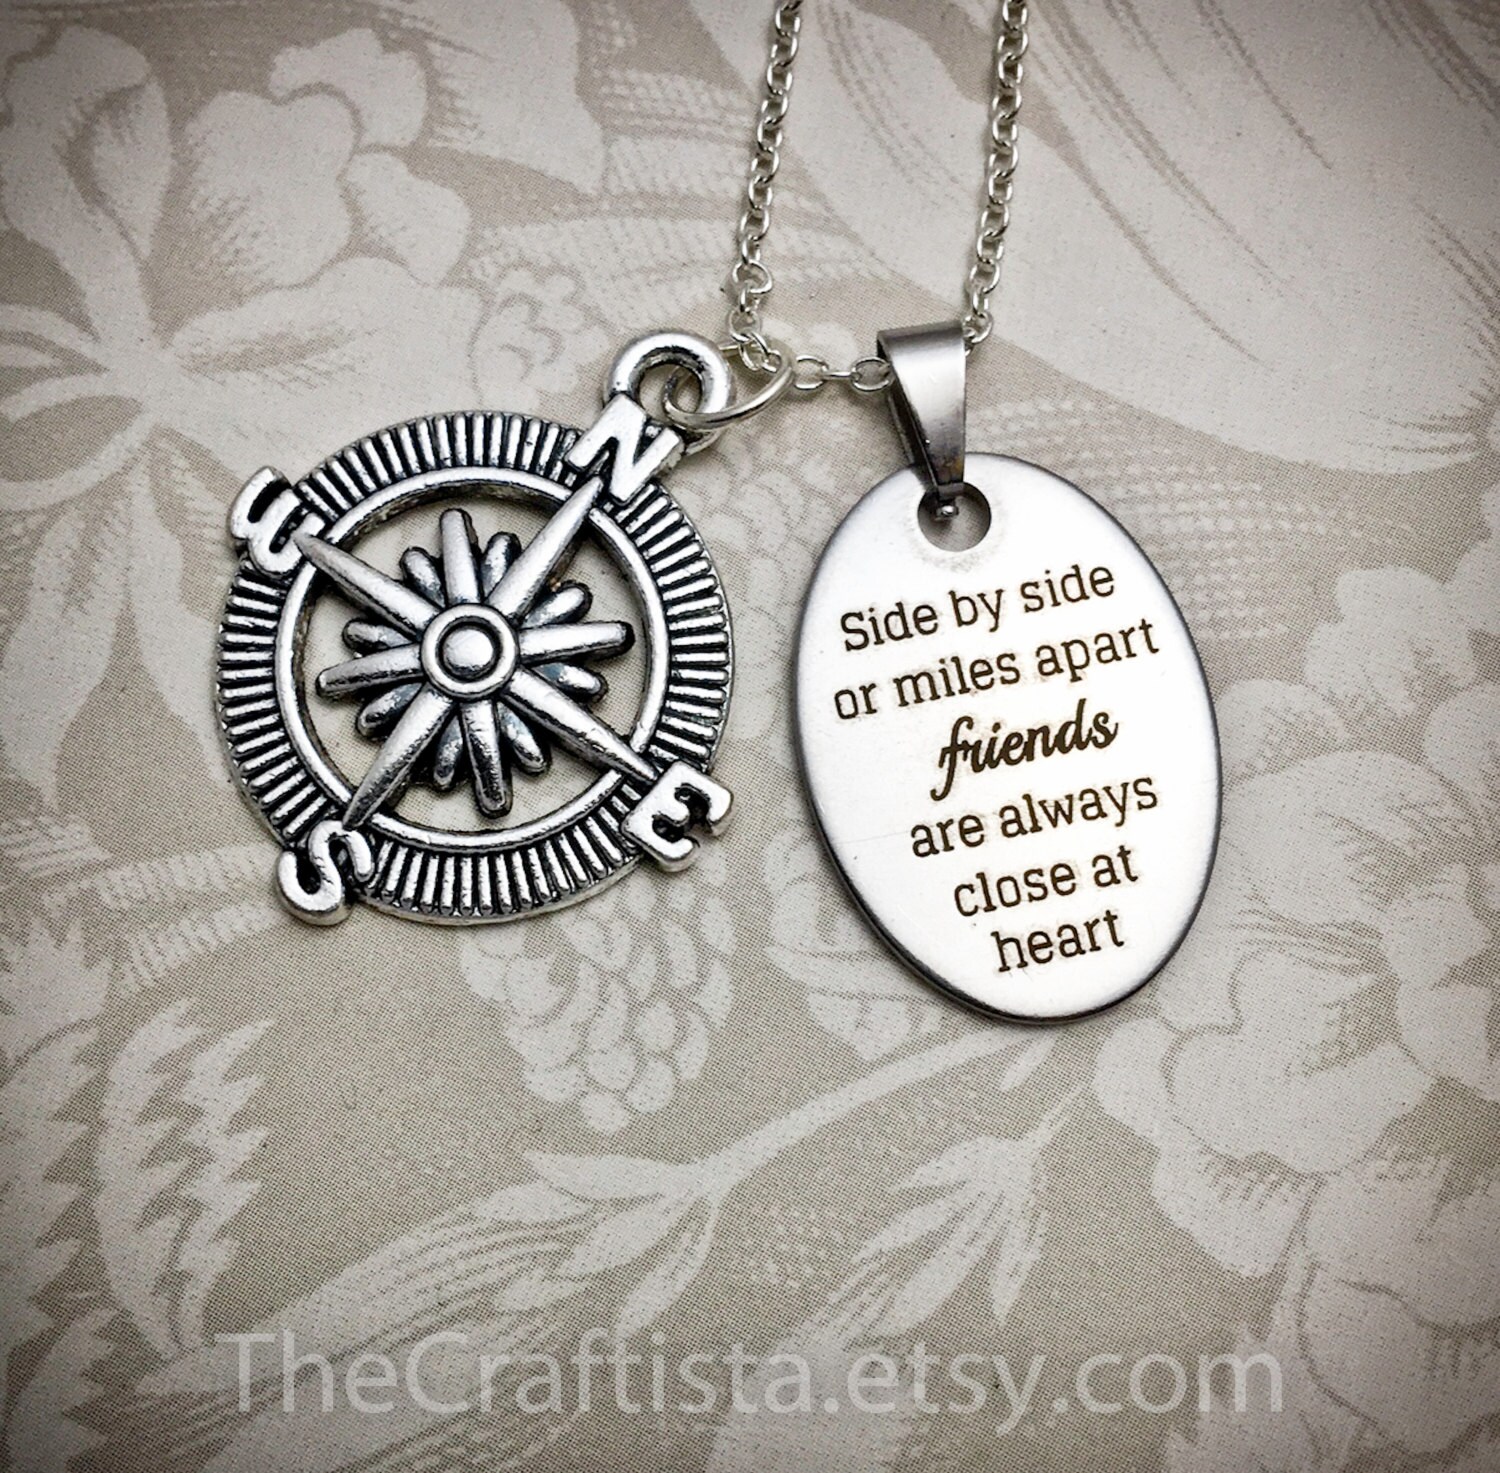 Friendship Necklace - Fr12 Gifts For Friends, Compass Necklace, Jewelry, Charm, Bff Graduation